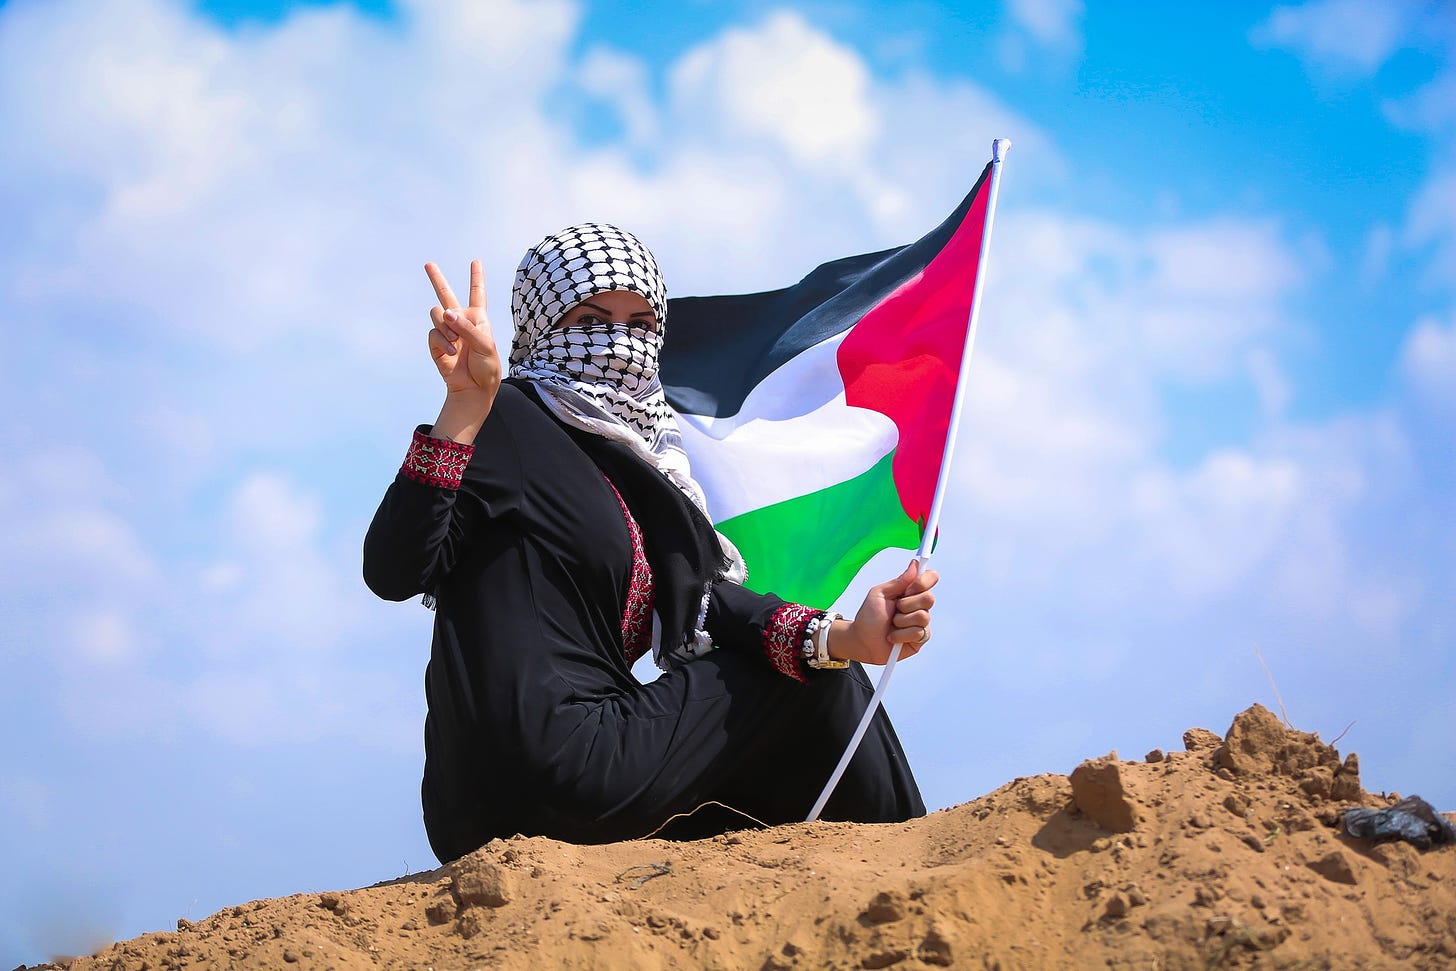 A woman wears all black and a keffiyeh as a head covering. She is facing the camera, sitting on a red dirt mound, and looking toward the camera while holding a peace sign with her left hand and a Palestinian flag with her right hand. The background is a blue sky with big fluffy white clouds.